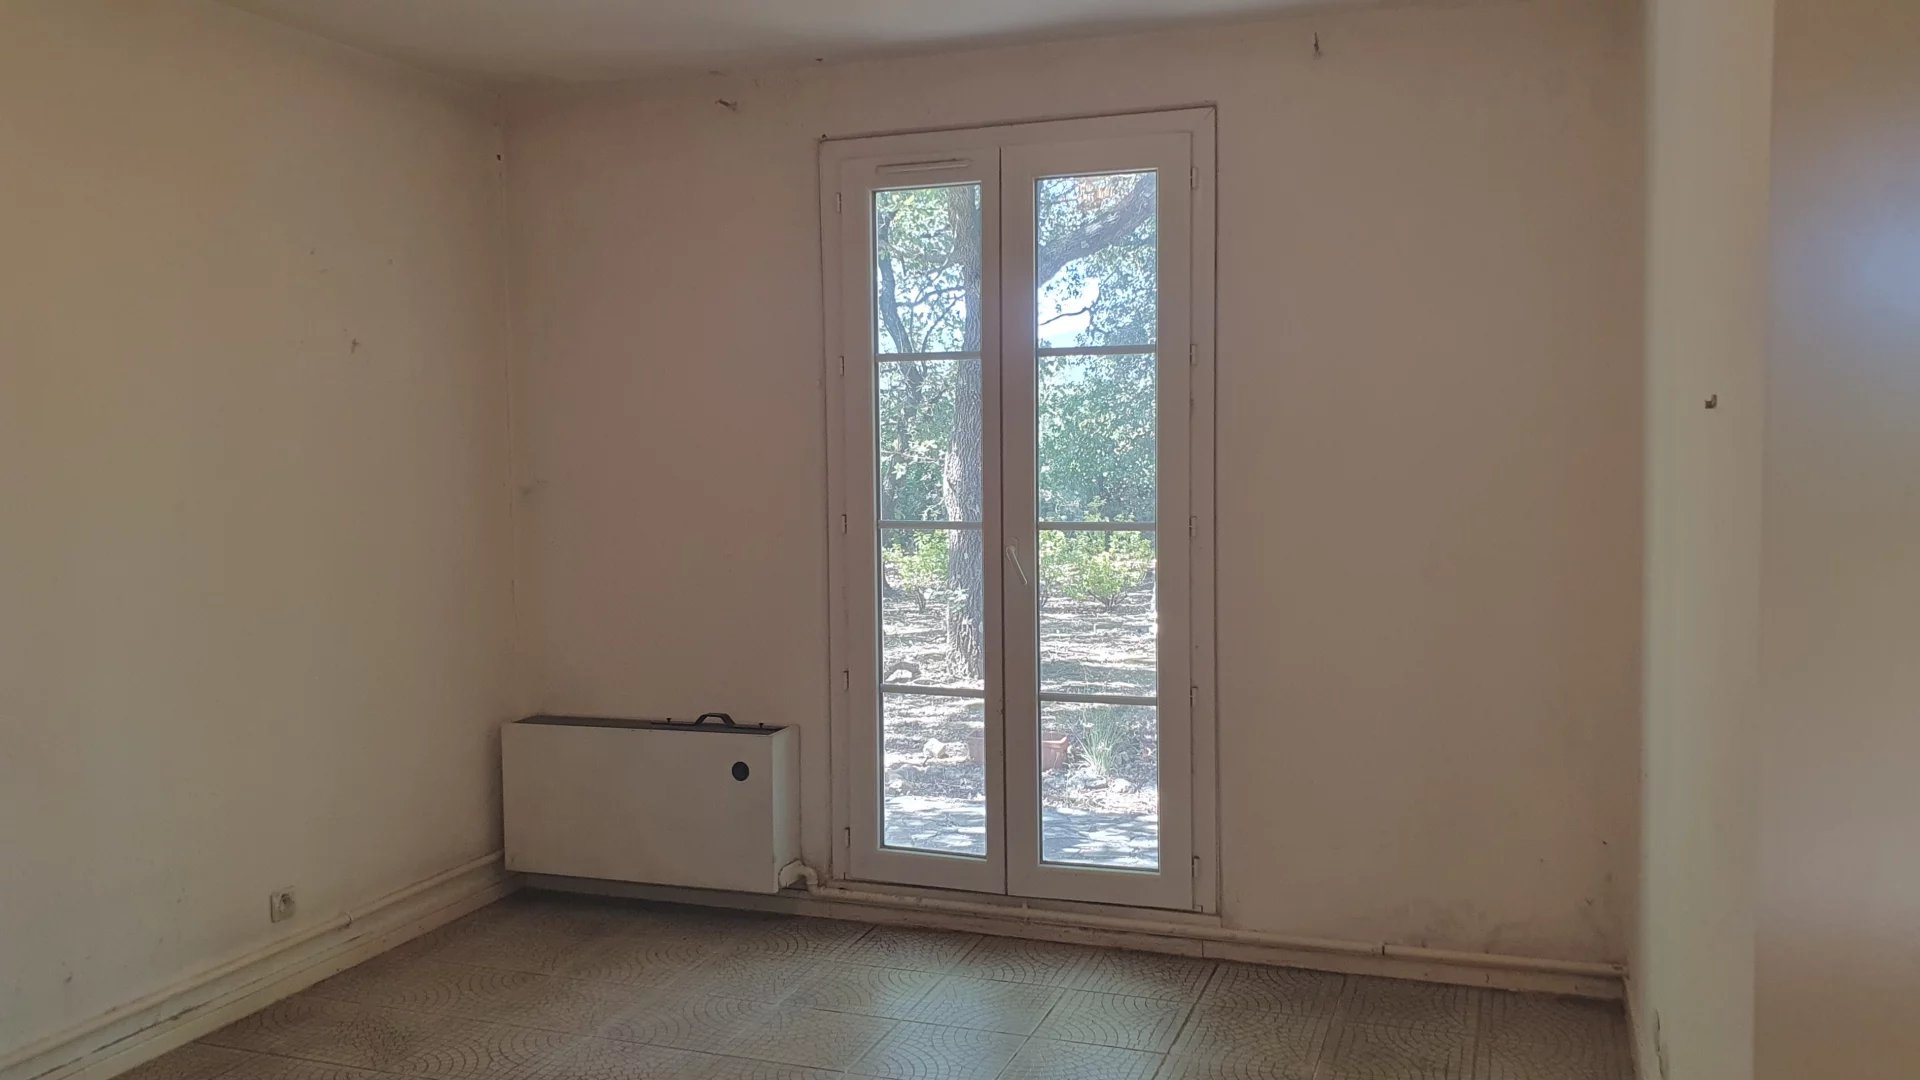 Villa with pool to be renovated in Figanieres.